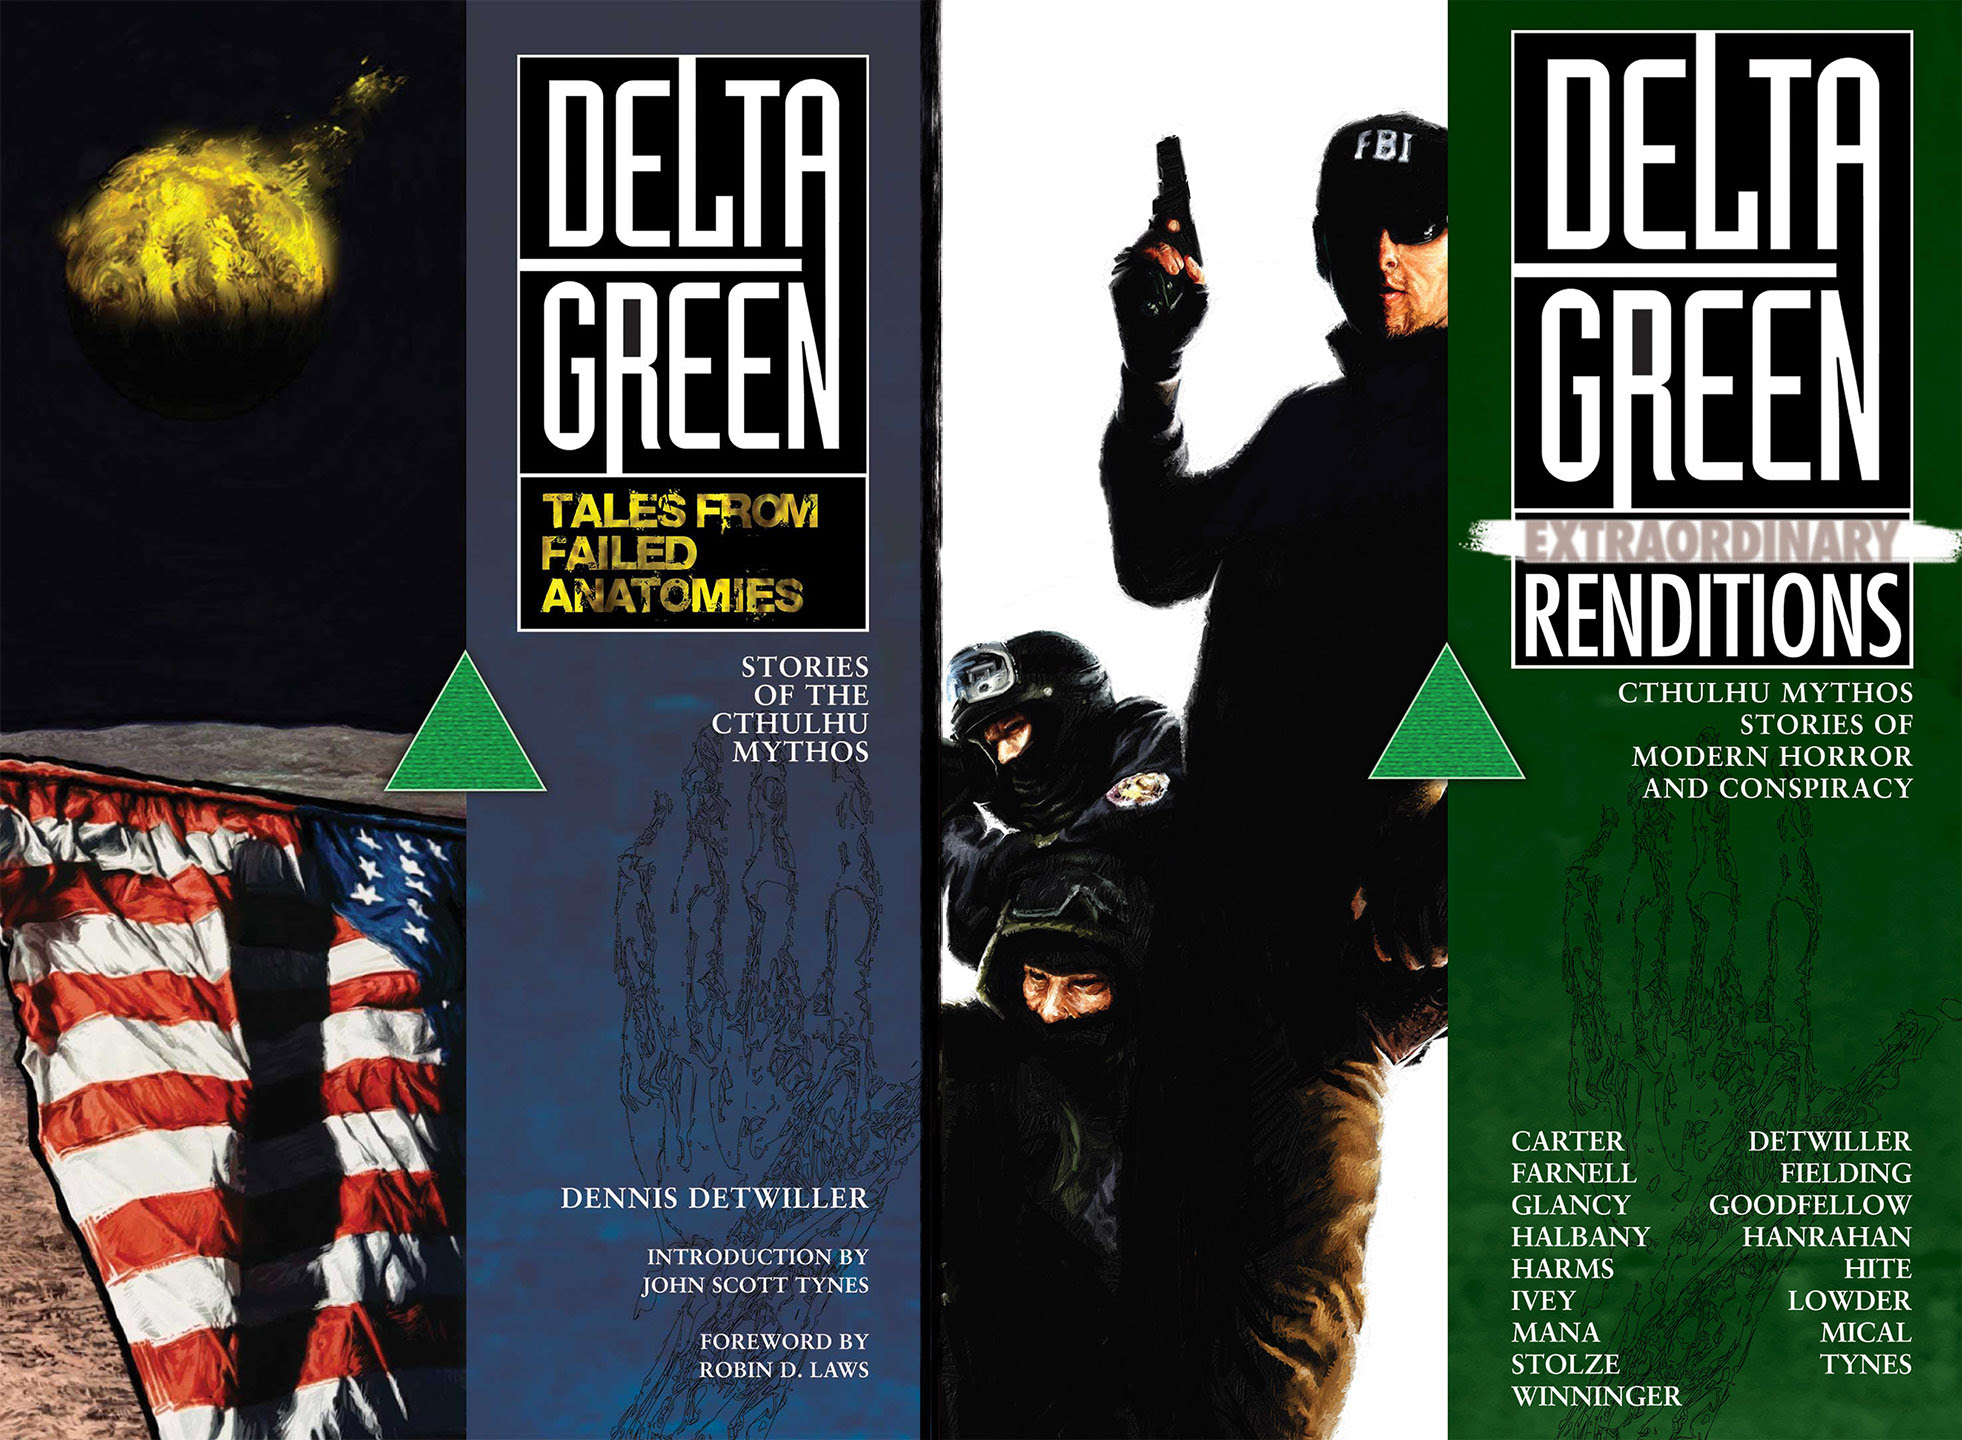 Delta-Green-fiction-covers-Anatomies-Renditions.jpg